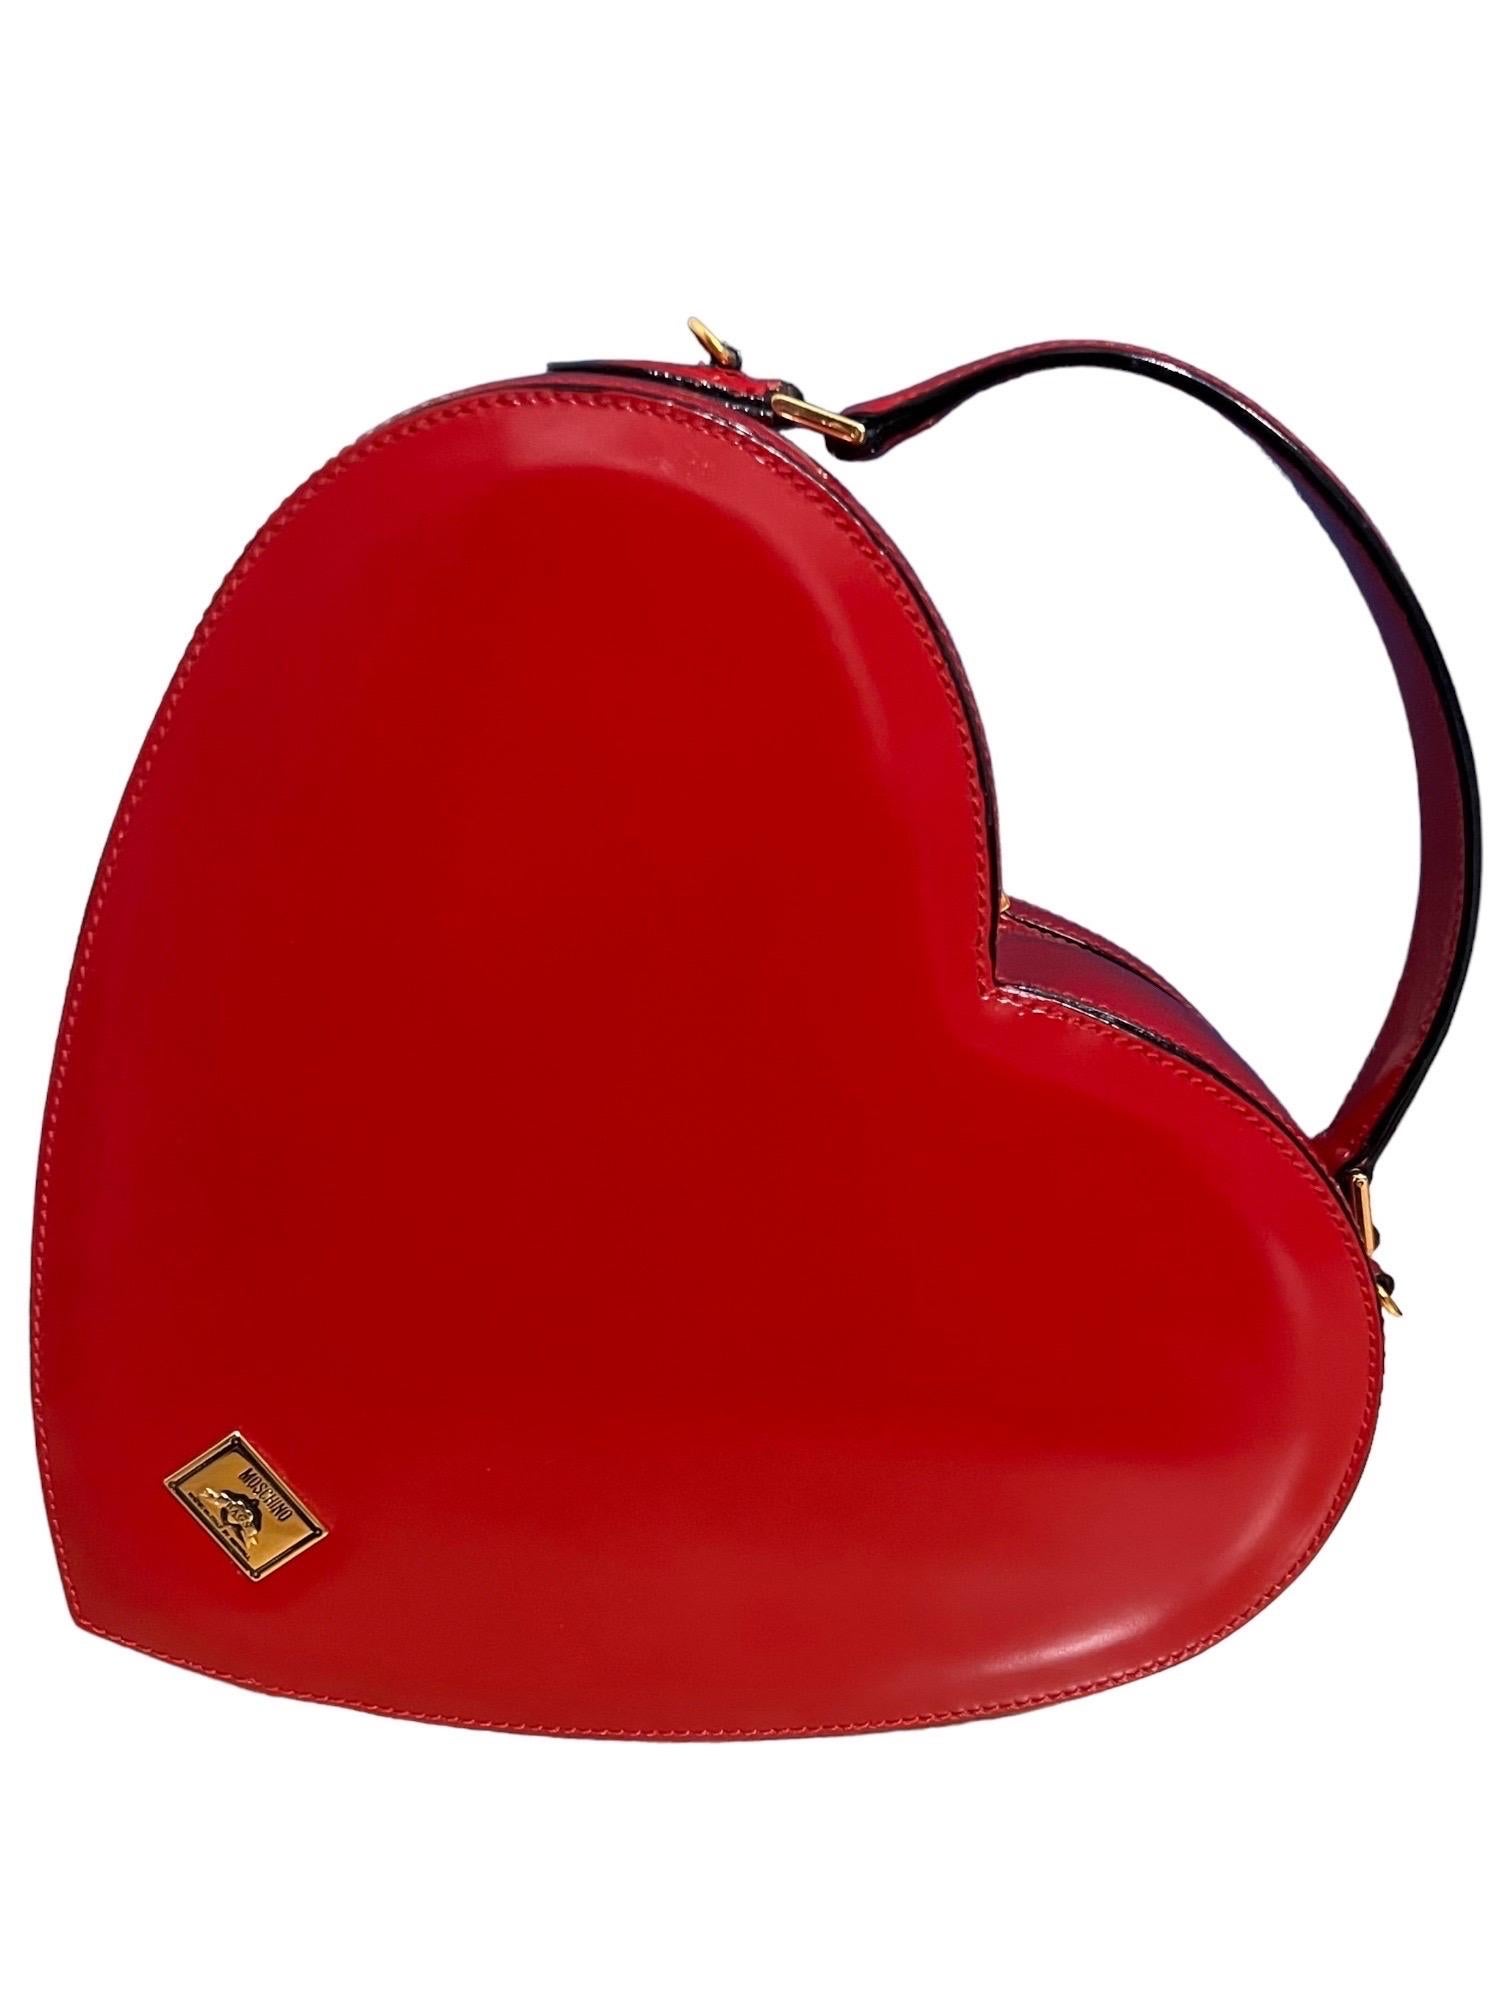 Moschino Vintage Red Leather Heart Bag The Nanny 9